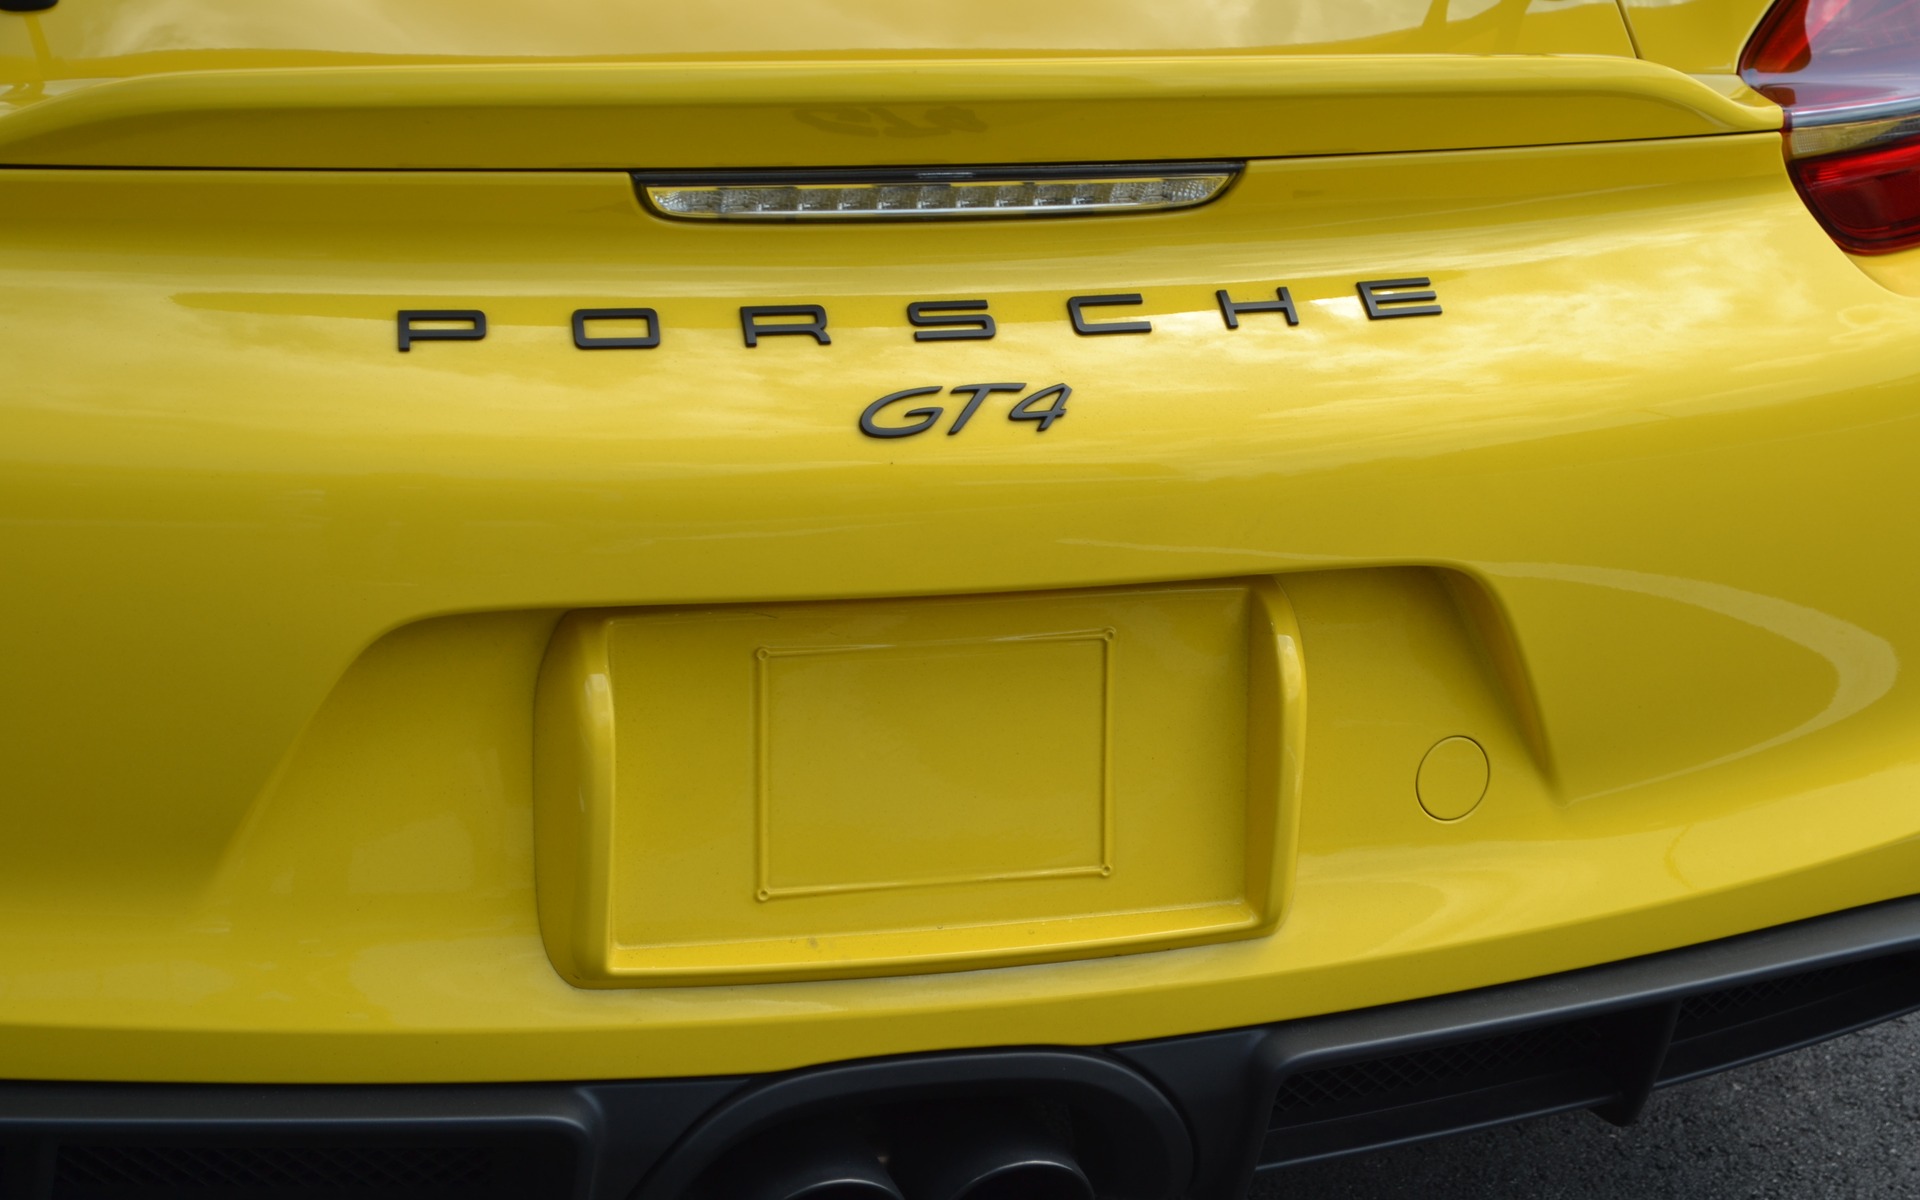 We recently had the chance to take the Cayman GT4 for a few laps.